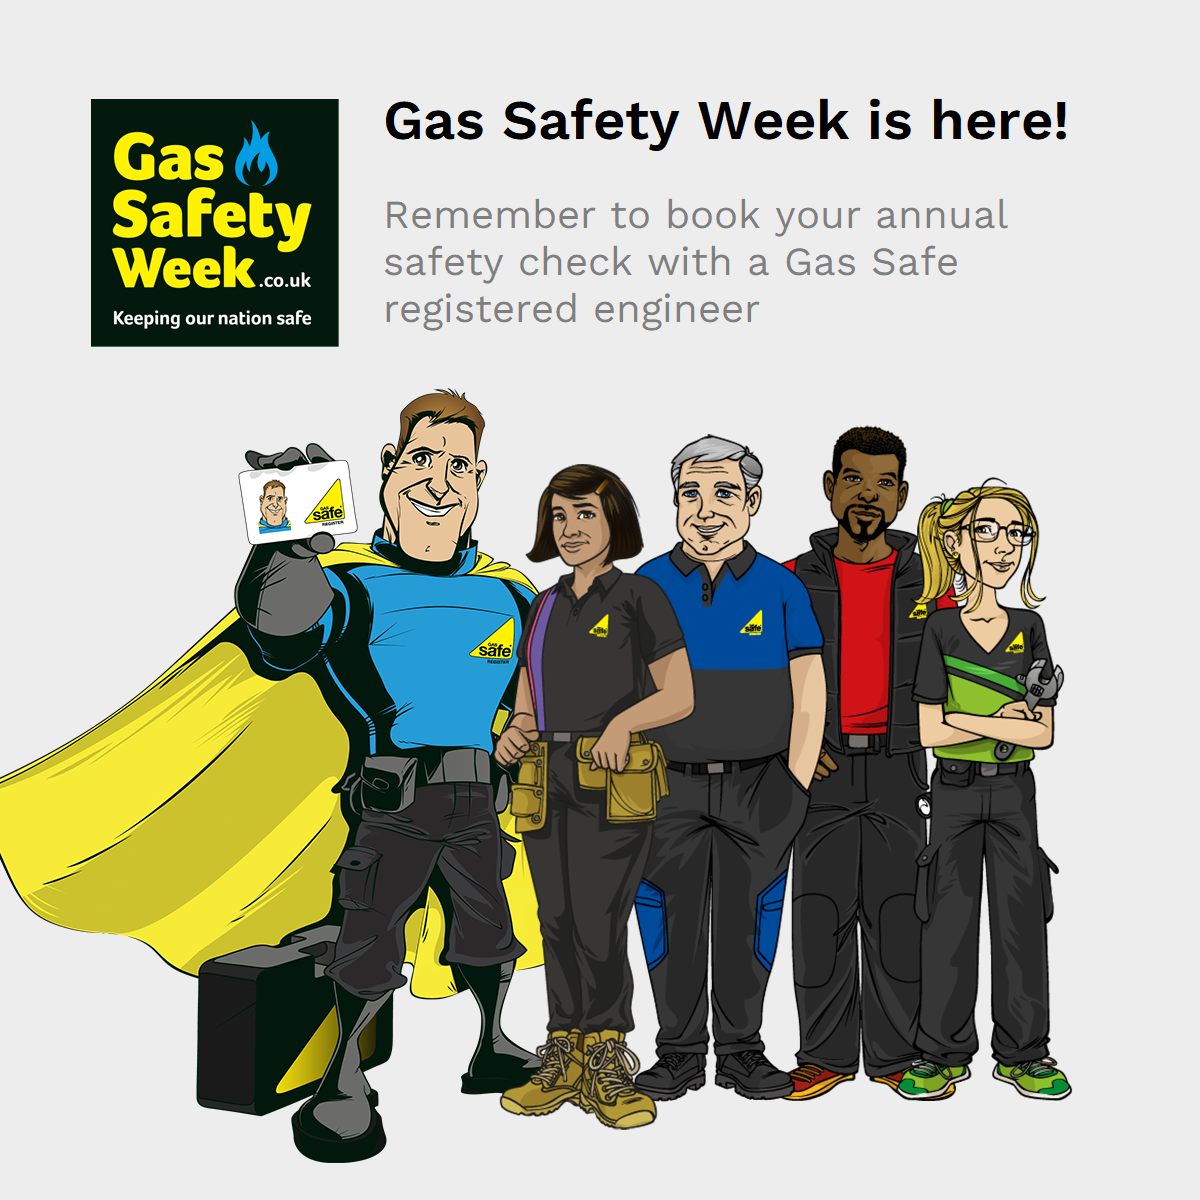 Gas Safety Week 2022 is here